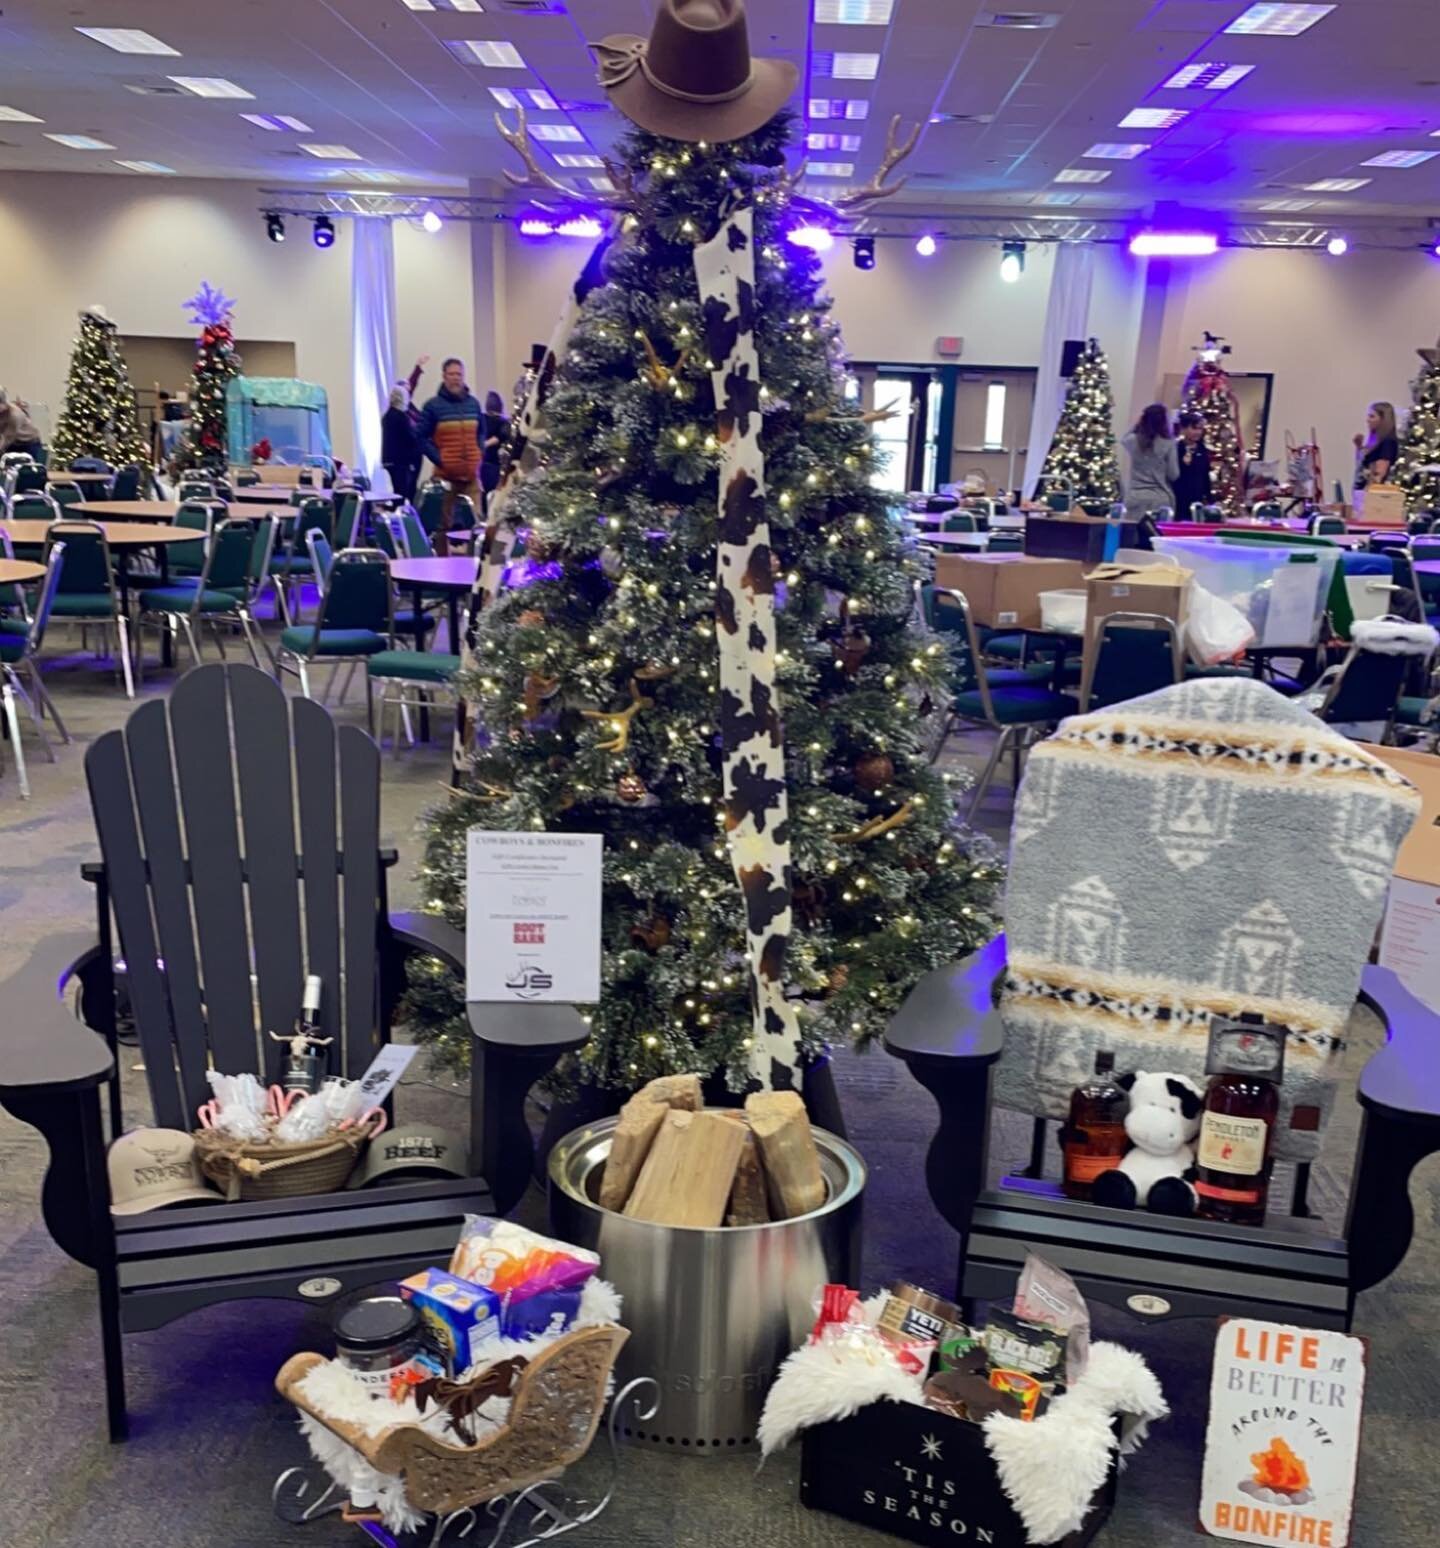 The #festivaloftrees held by @hospiceofredmond was a great success! And @sheree401  had even more fun decorating the @jandscontracting #cowboysandbonfires tree! Looking forward to next year already. #hospice #hospicecare #hospiceofredmond #merrychris